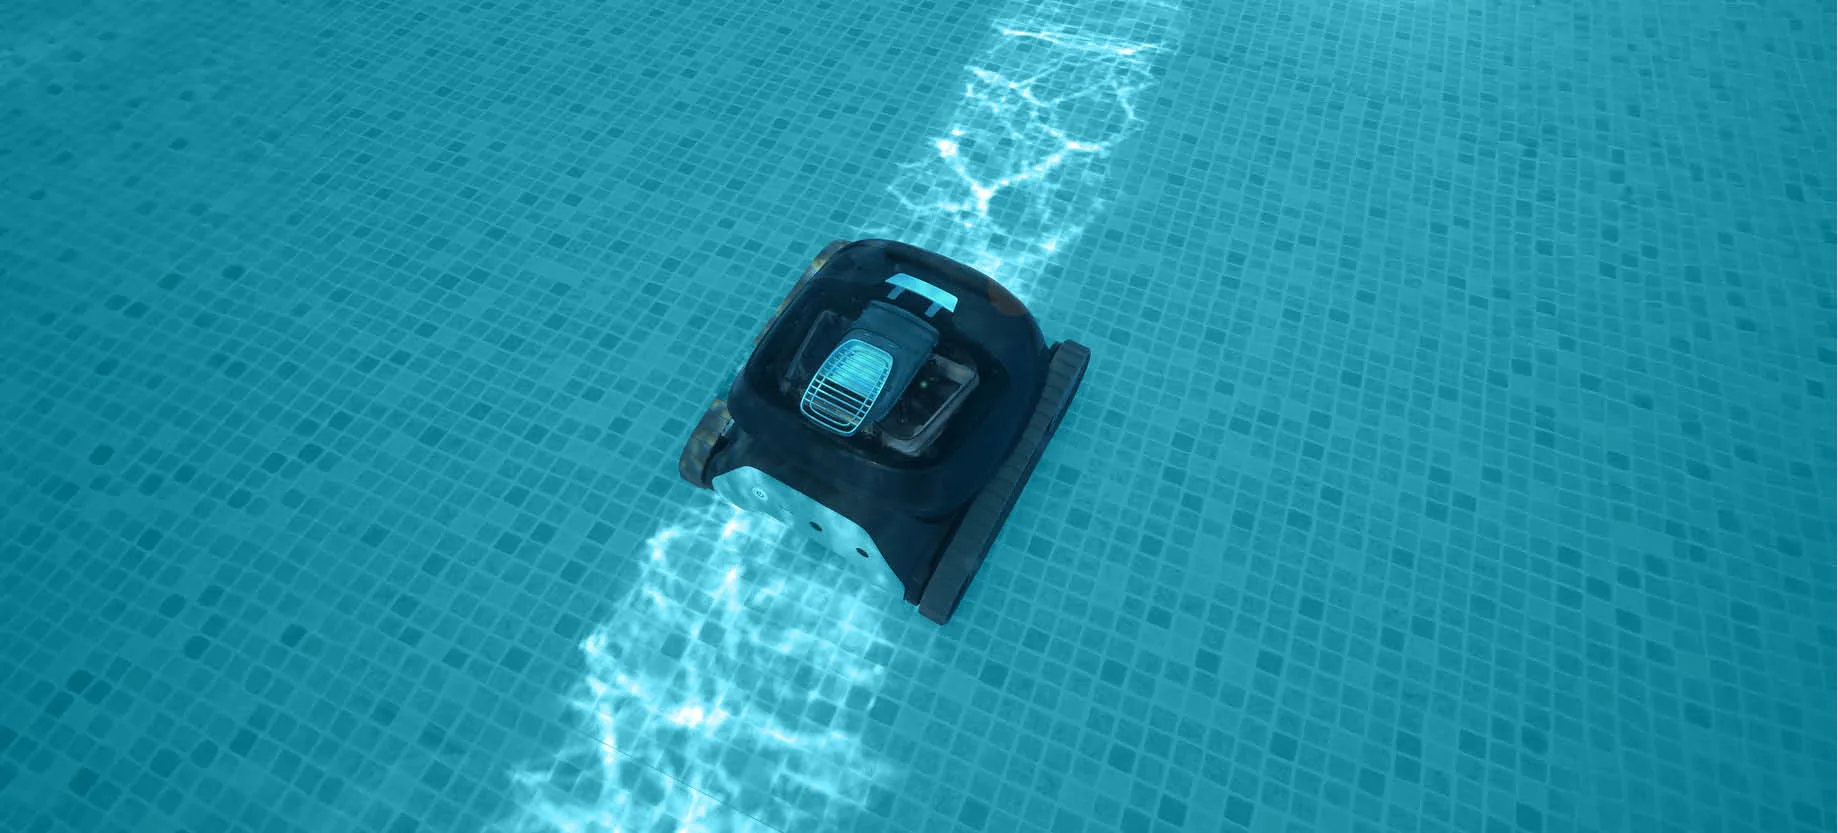 Dolphin robotic pool cleaners cost effective solution